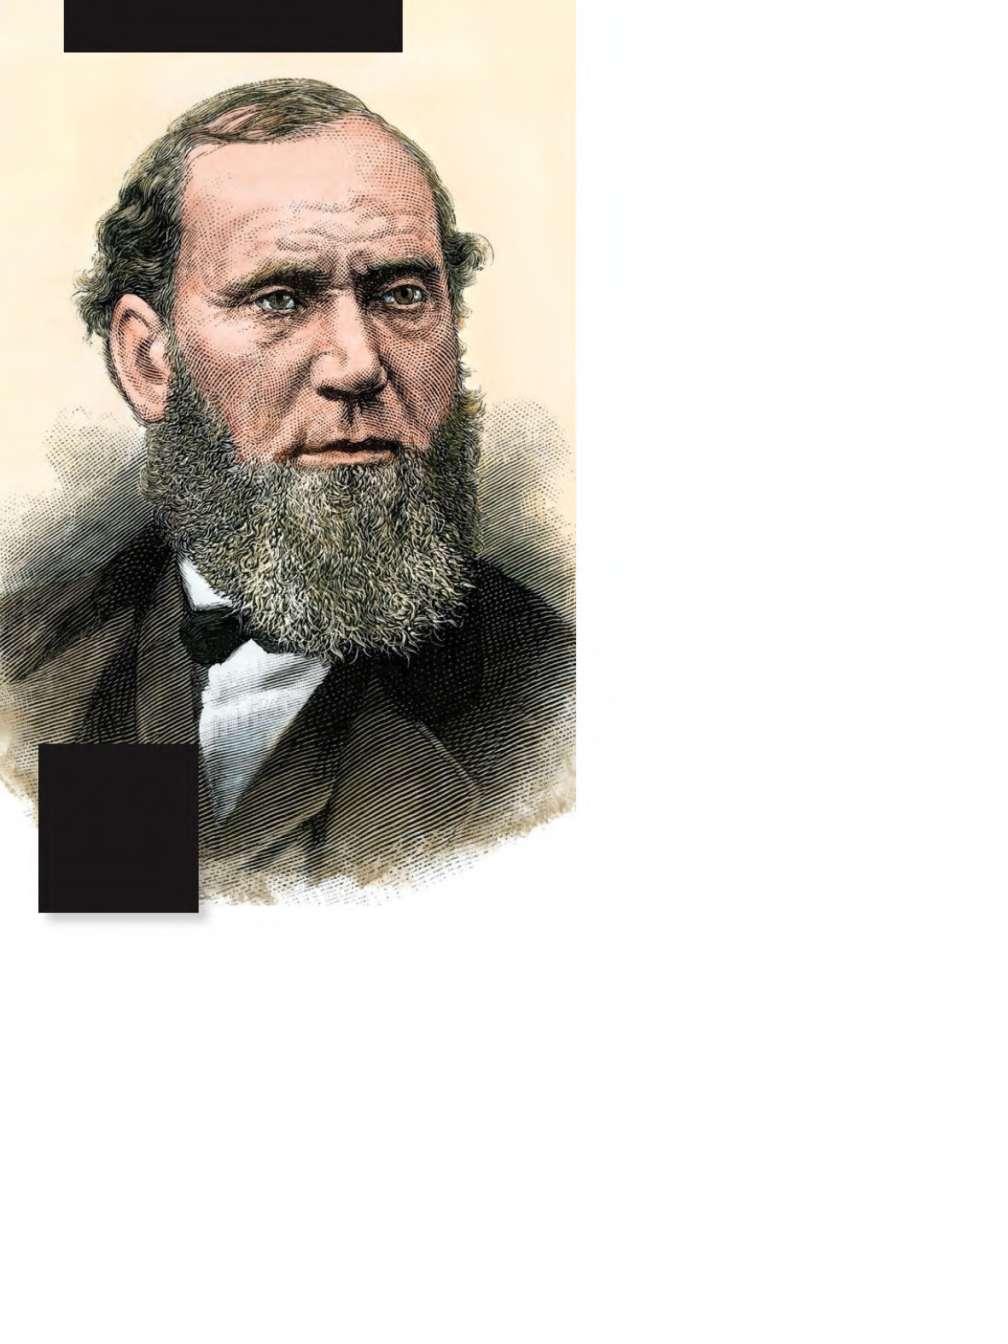 Letters Detective Allan Pinkerton wasn t shy about touting his ability to nab criminals, but the James boys eluded him.